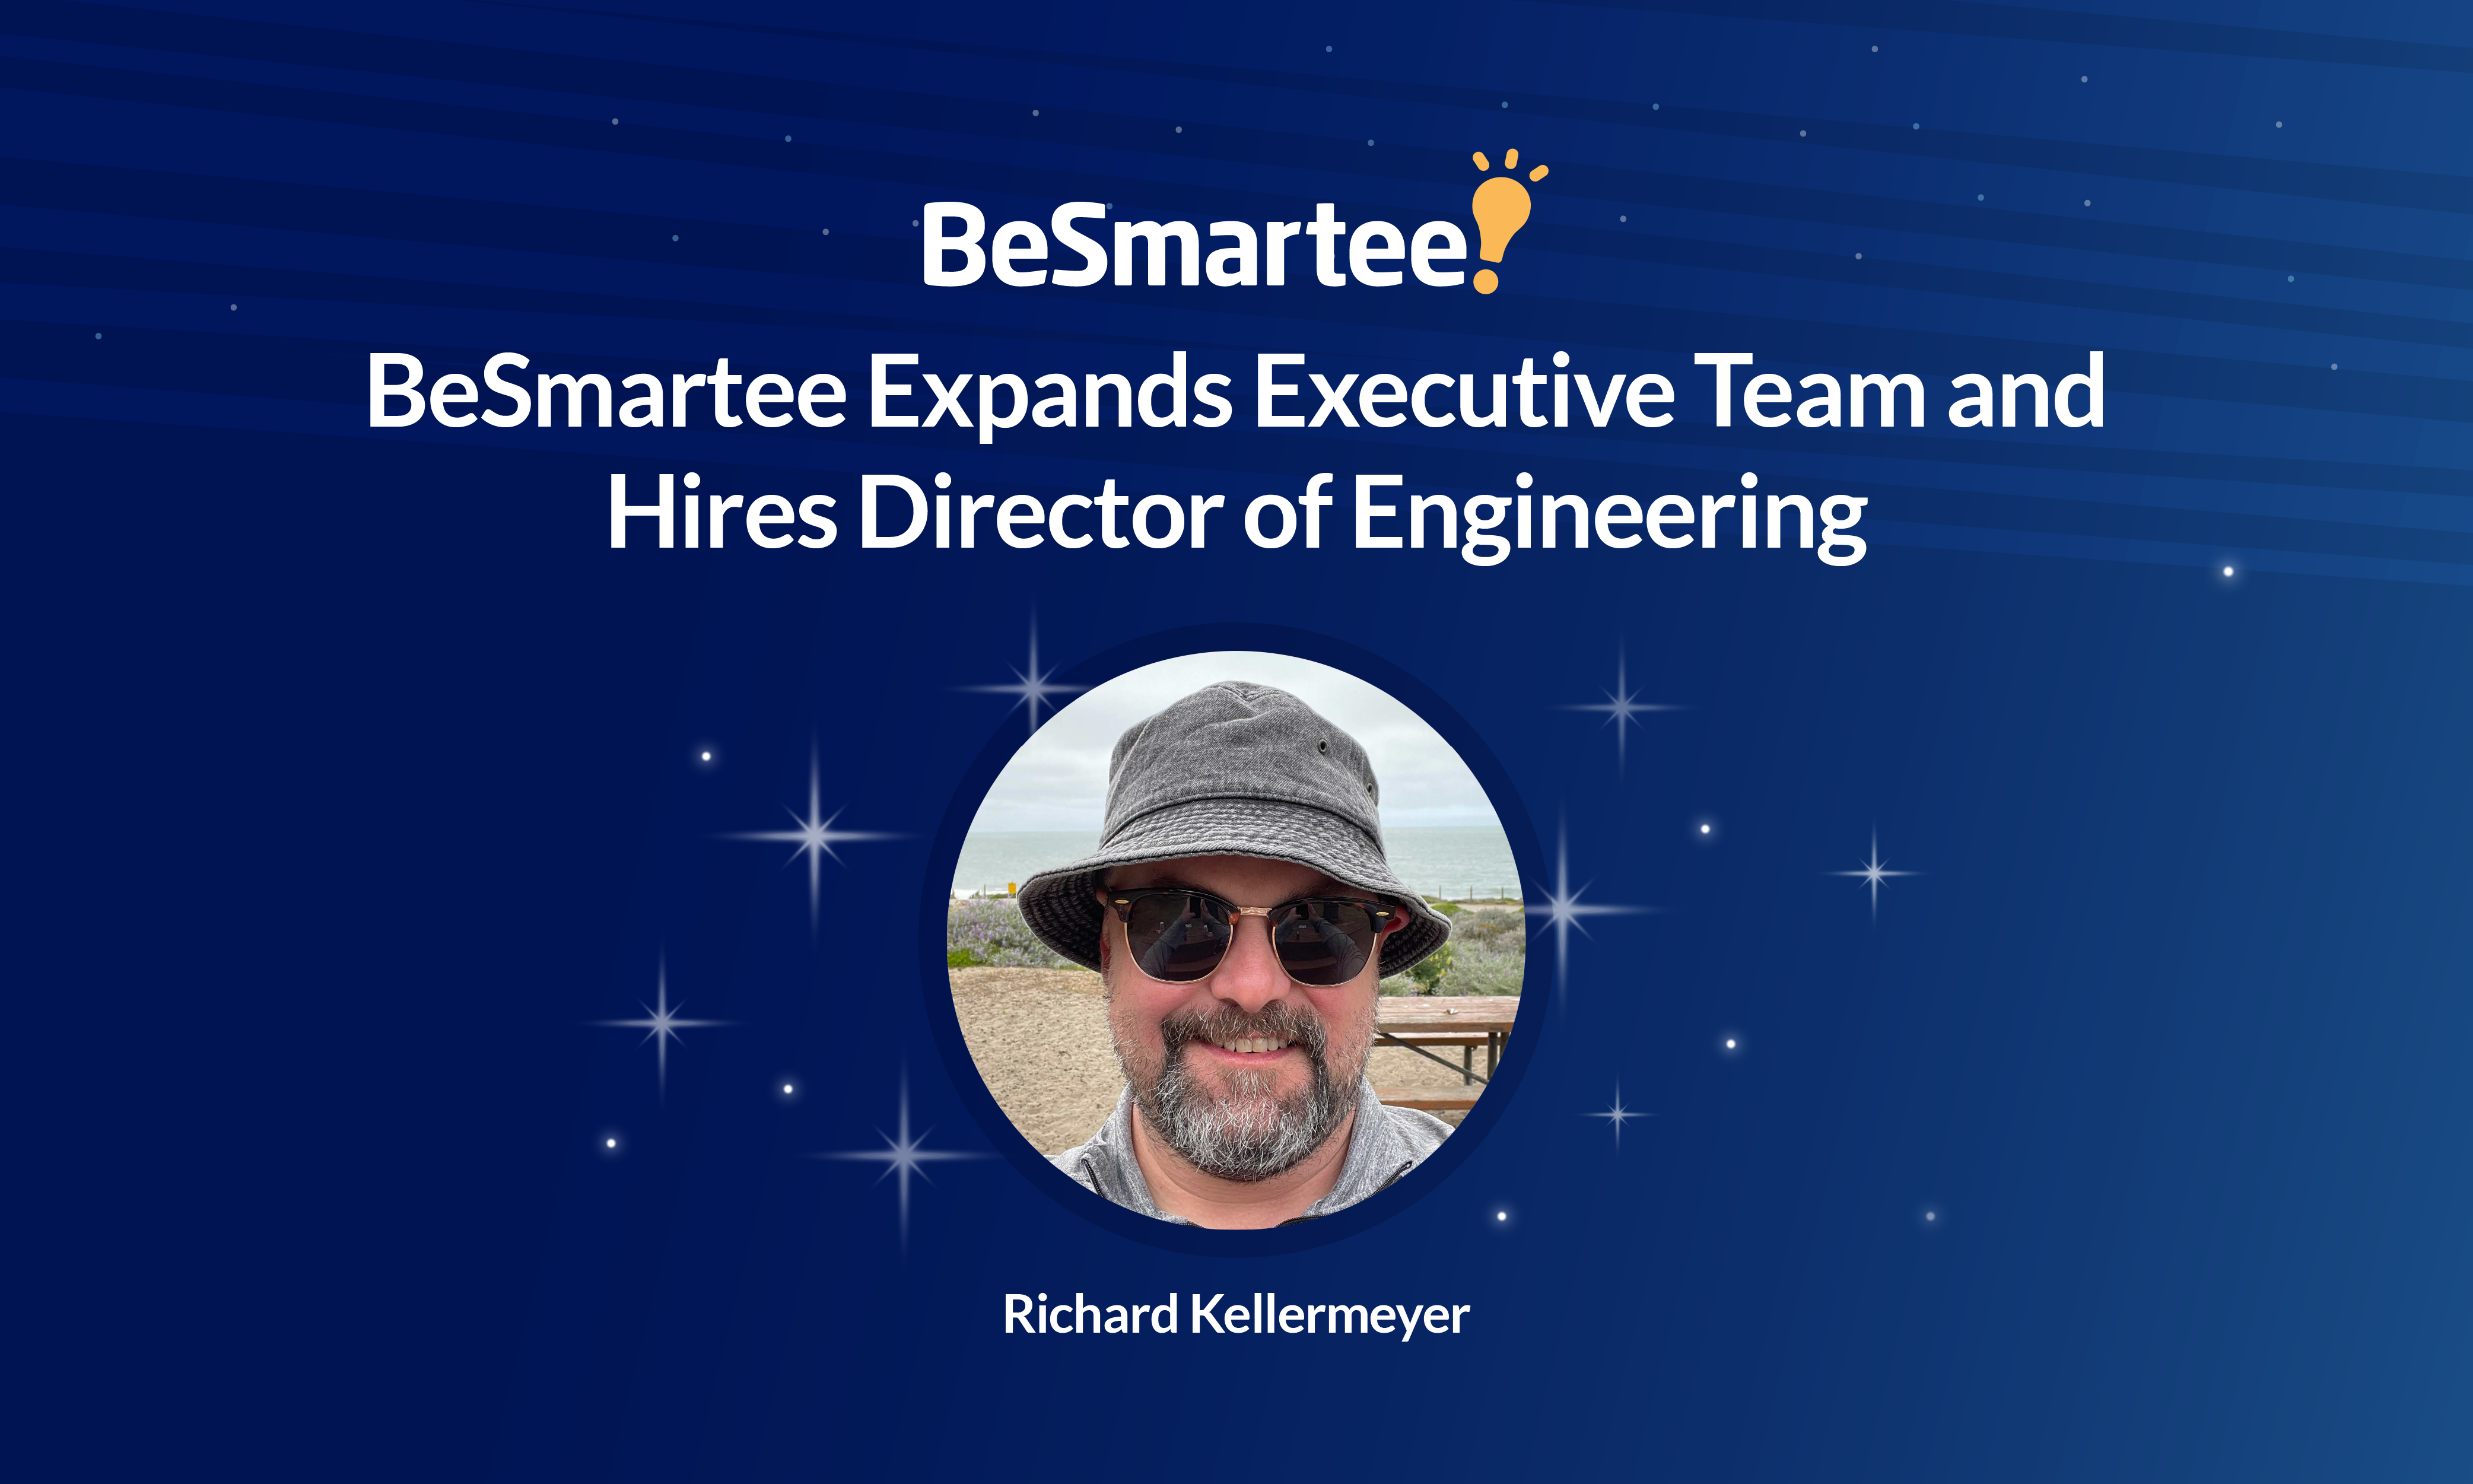 BeSmartee Expands Executive Team and Hires Director of Engineering